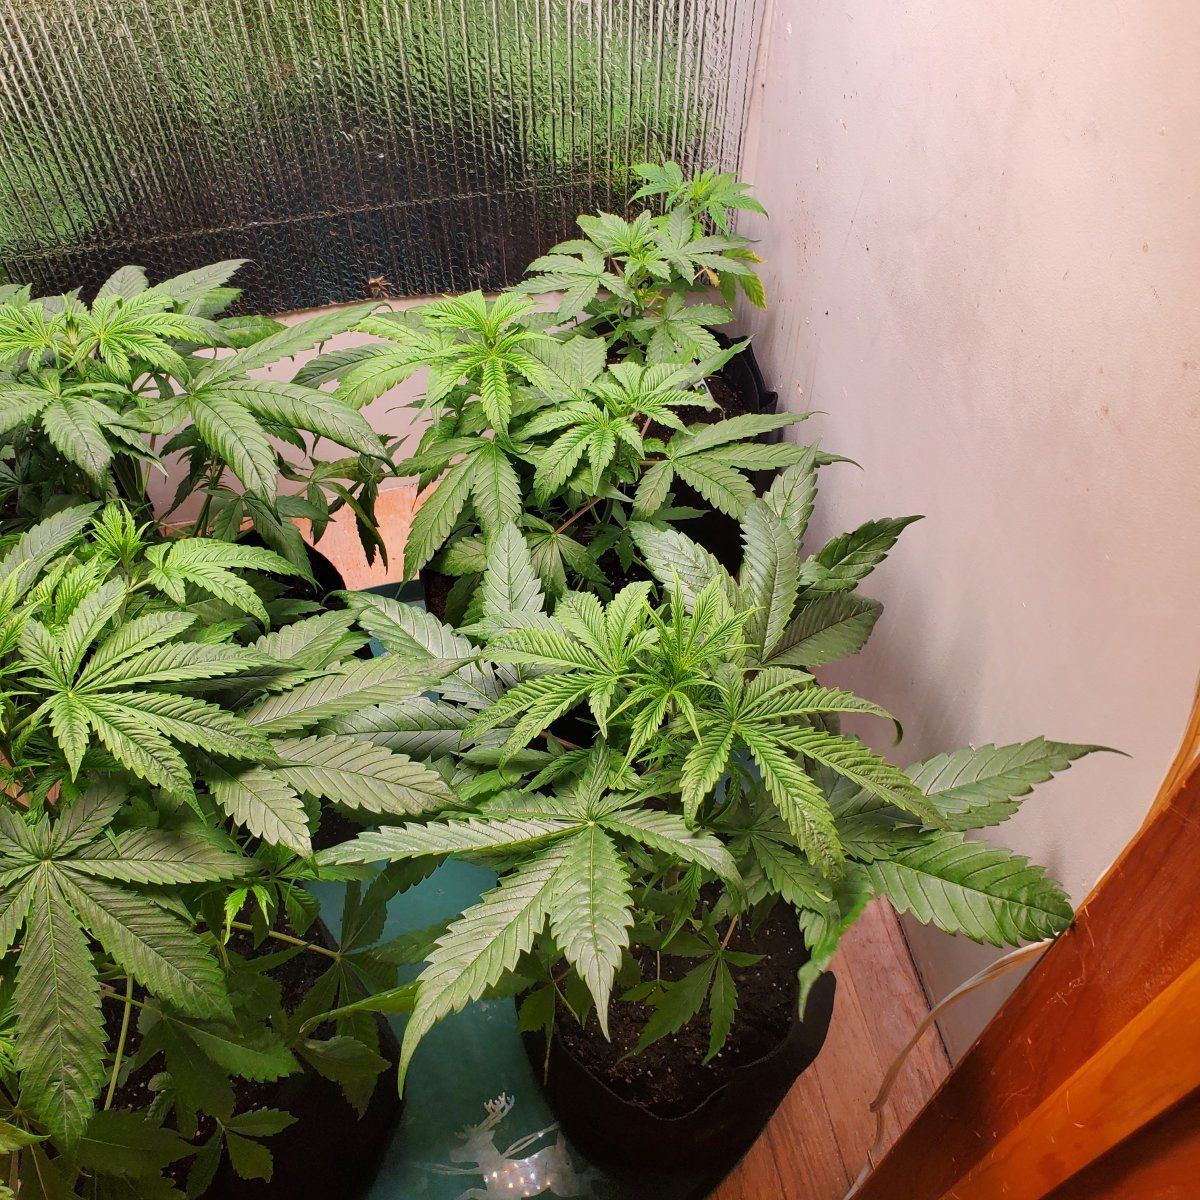 New herewould love advice on 1st indoor growpics  specifics in post 4